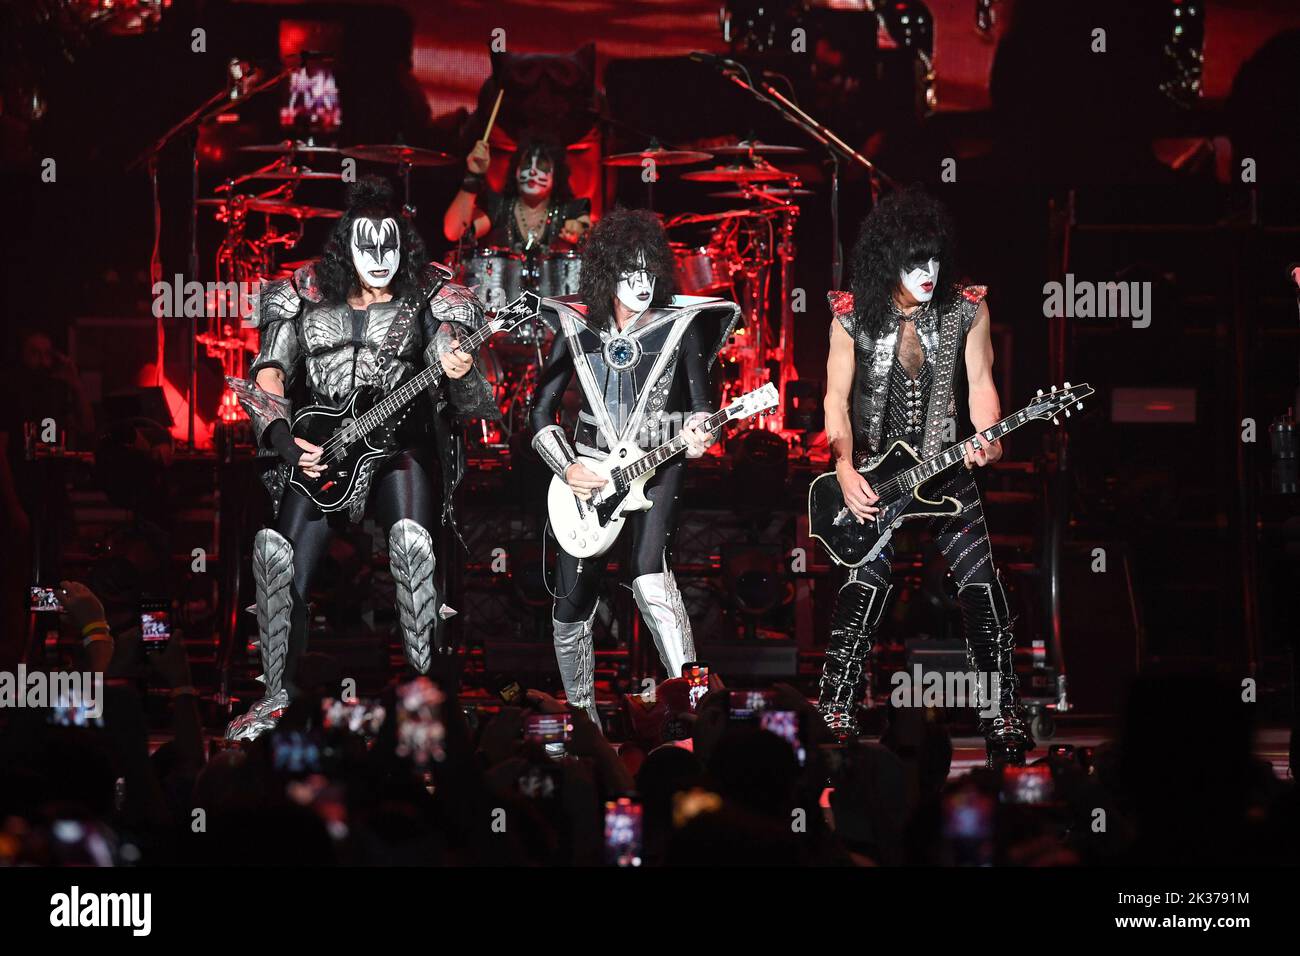 WEST PALM BEACH, FL - SEPTEMBER 21: KISS performs during the 'End of the Road World Tour' at The iTHINK Financial Amphitheatre on September 21, 2022 in West Palm Beach Florida. Credit: mpi04/MediaPunch Stock Photo